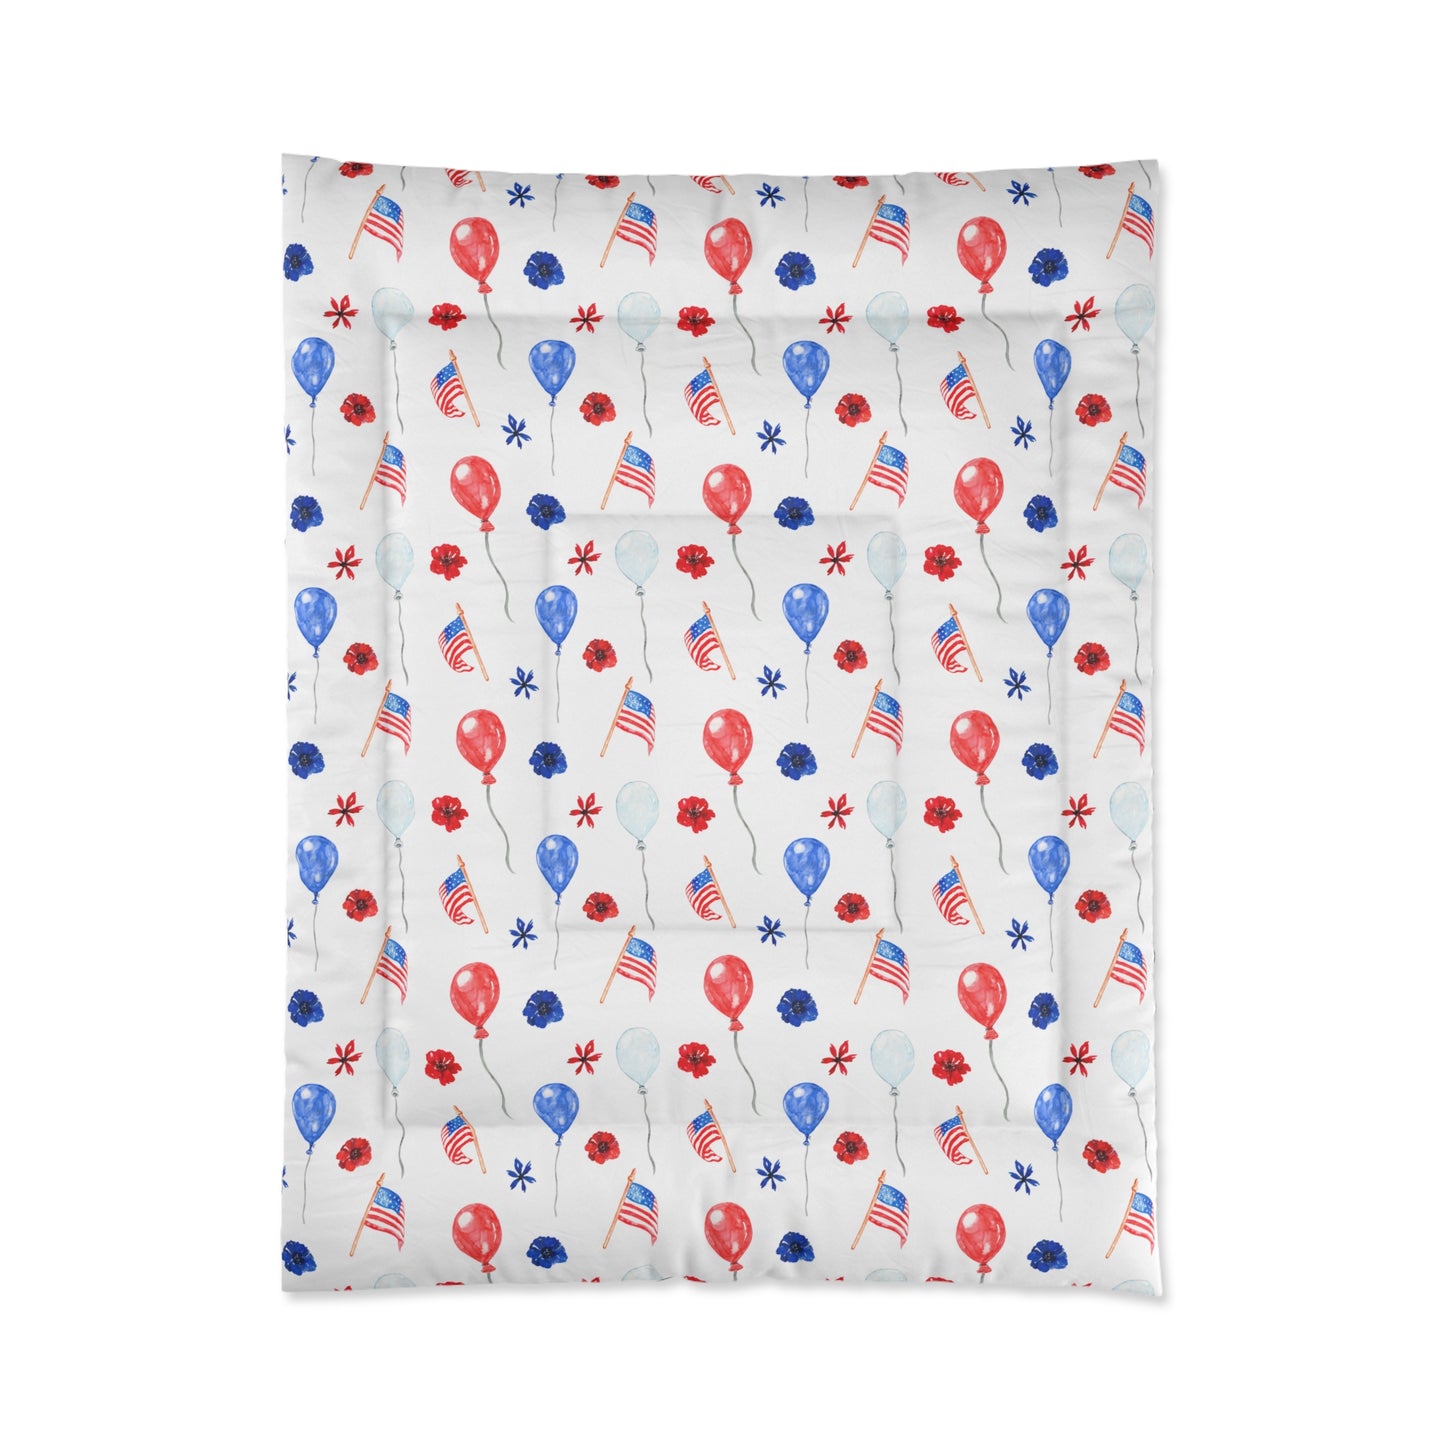 American Flags and Balloons Comforter